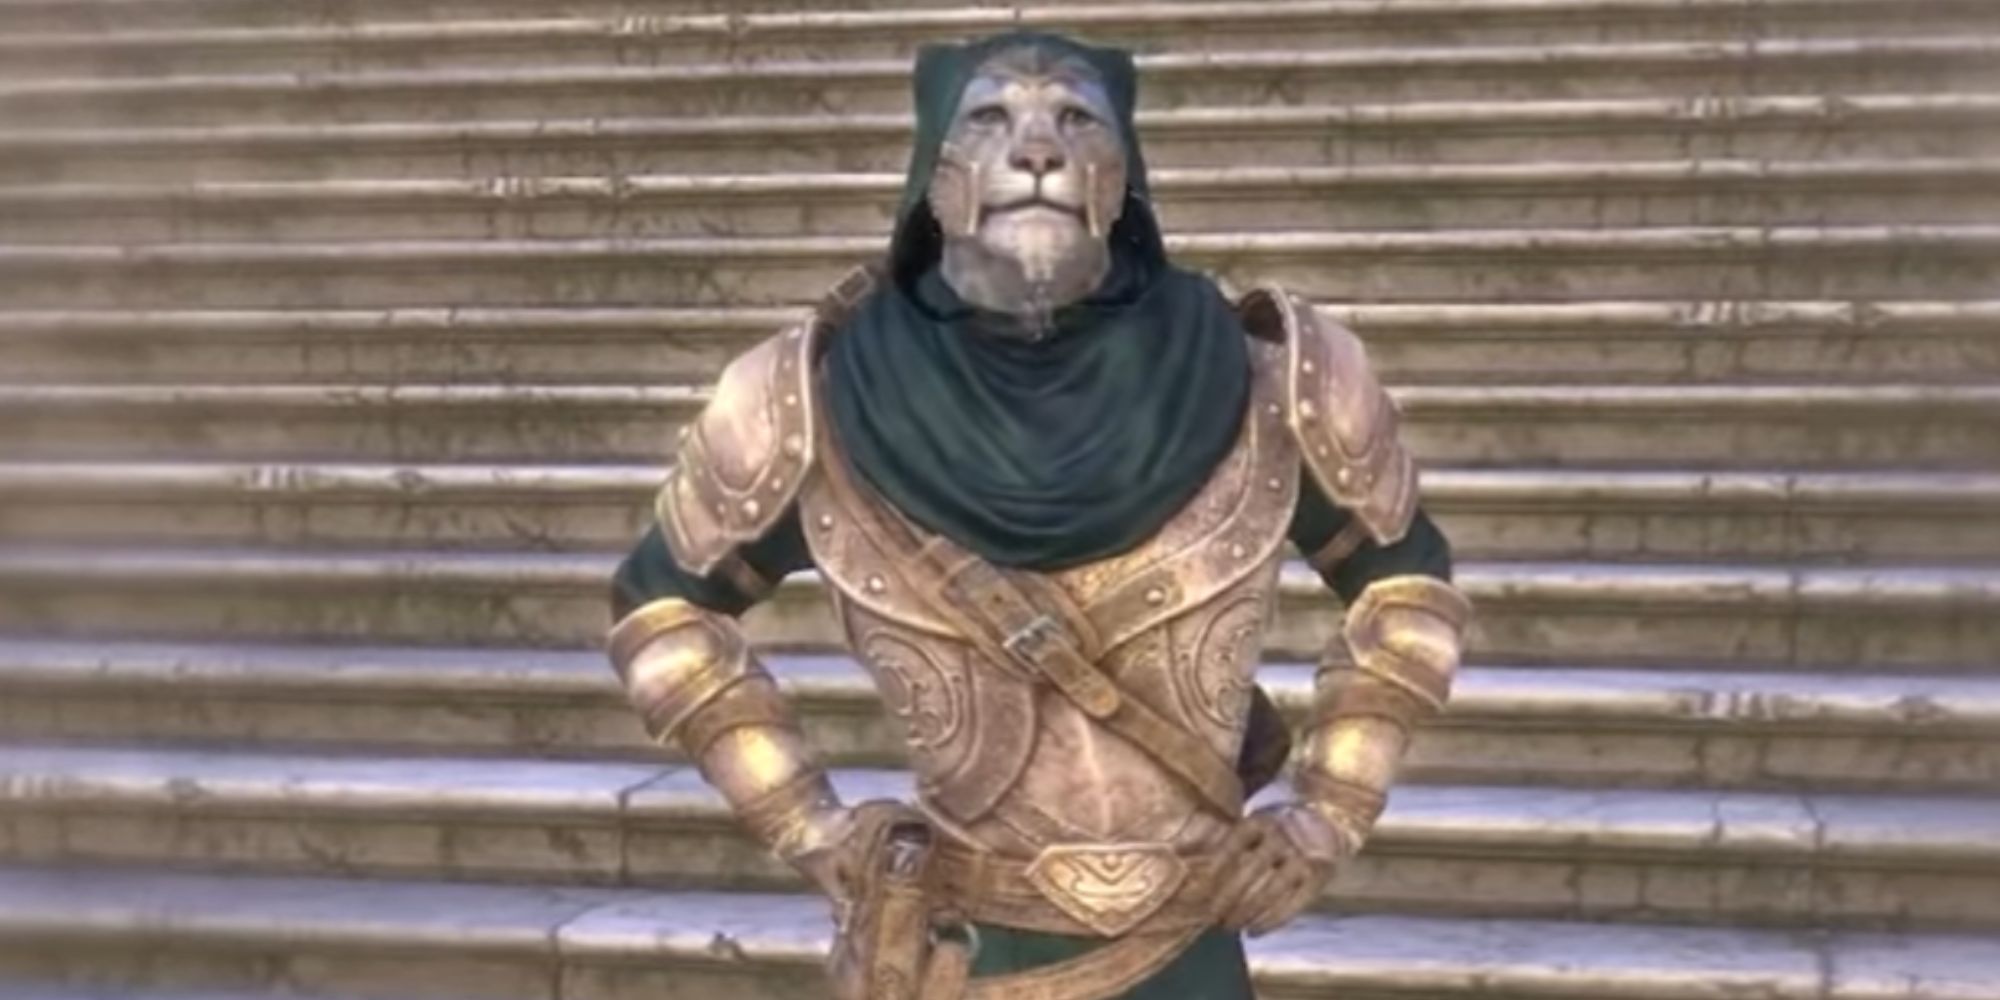 ESO Khajiit Character Wearing The High Rock Spellsword Outfit